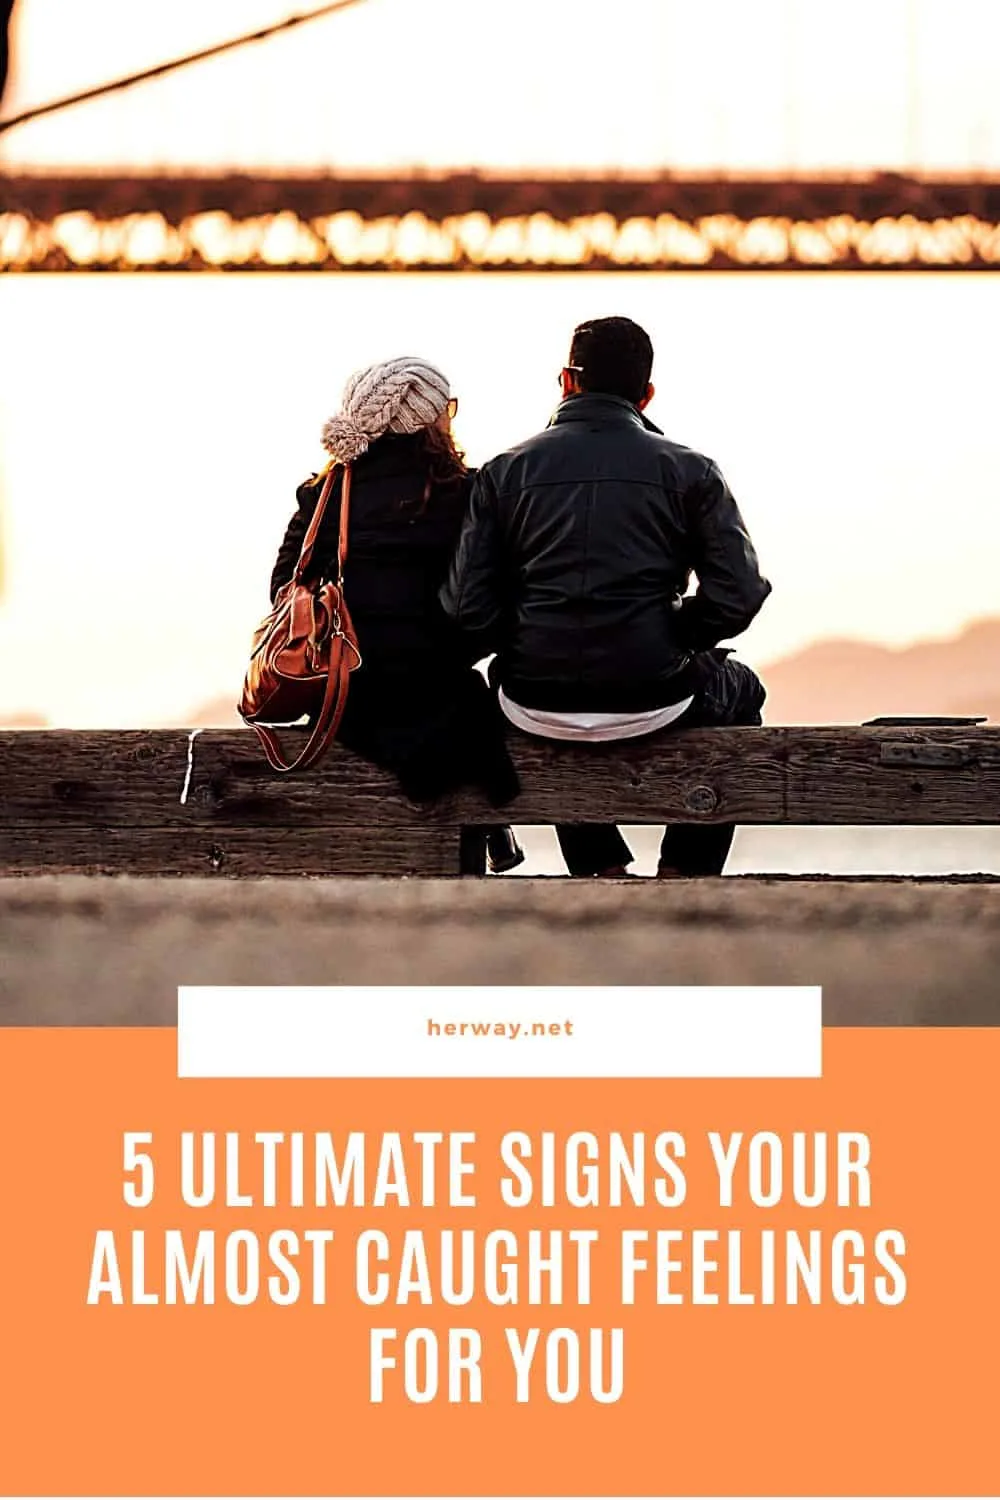 5 Ultimate Signs Your Almost Caught Feelings For You